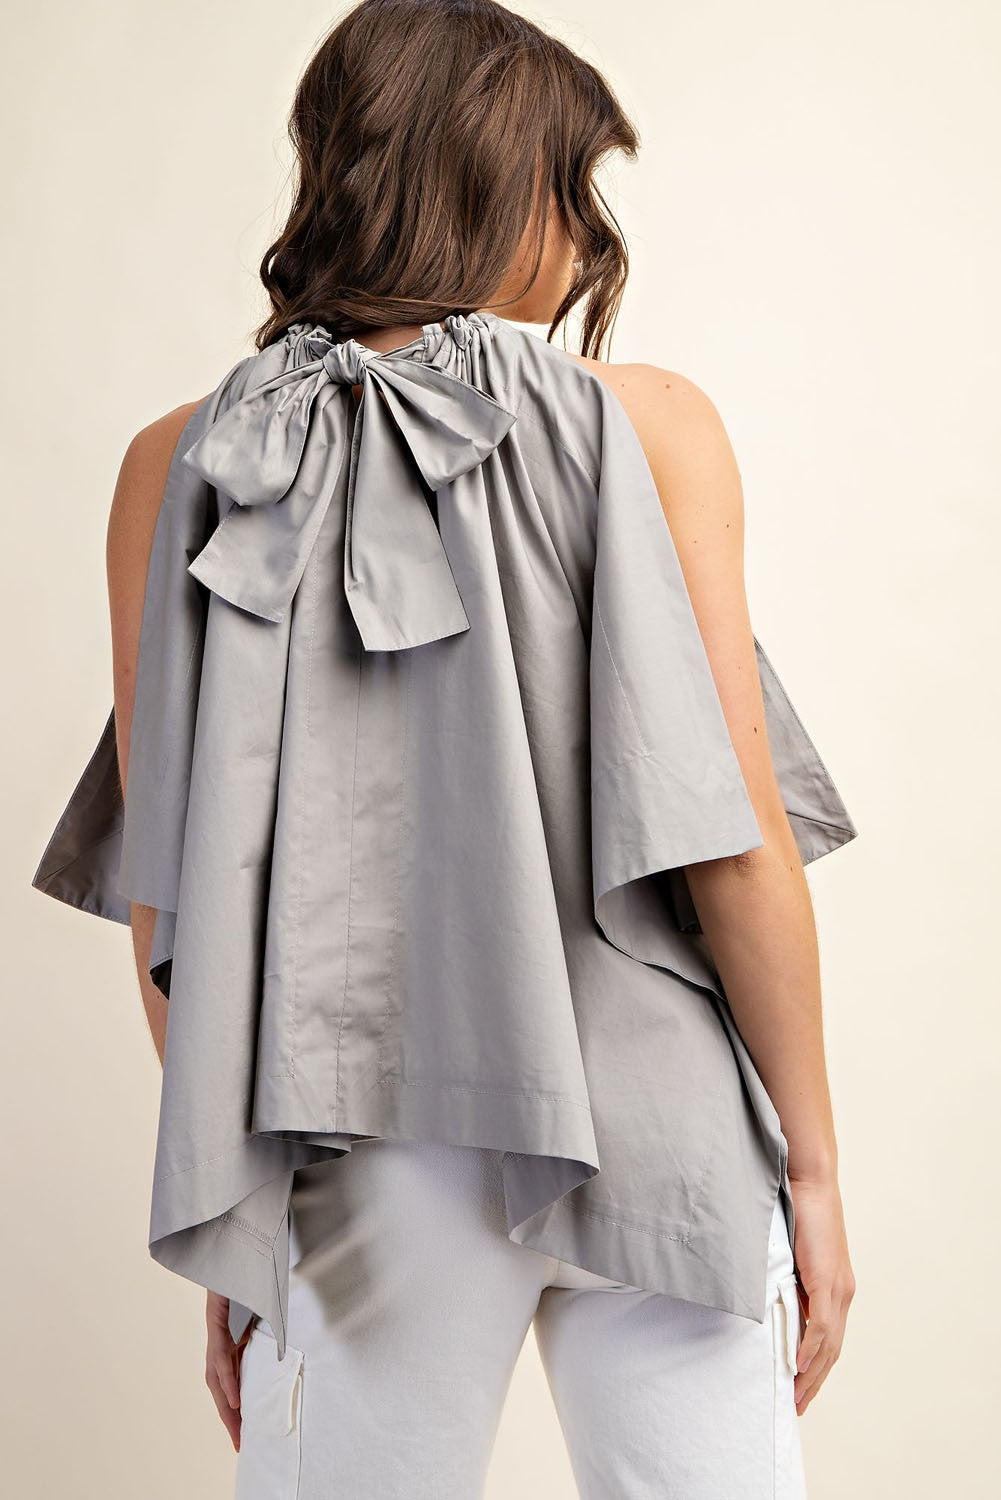 BOWING IN THE WIND SUMMER TOP-GRAY